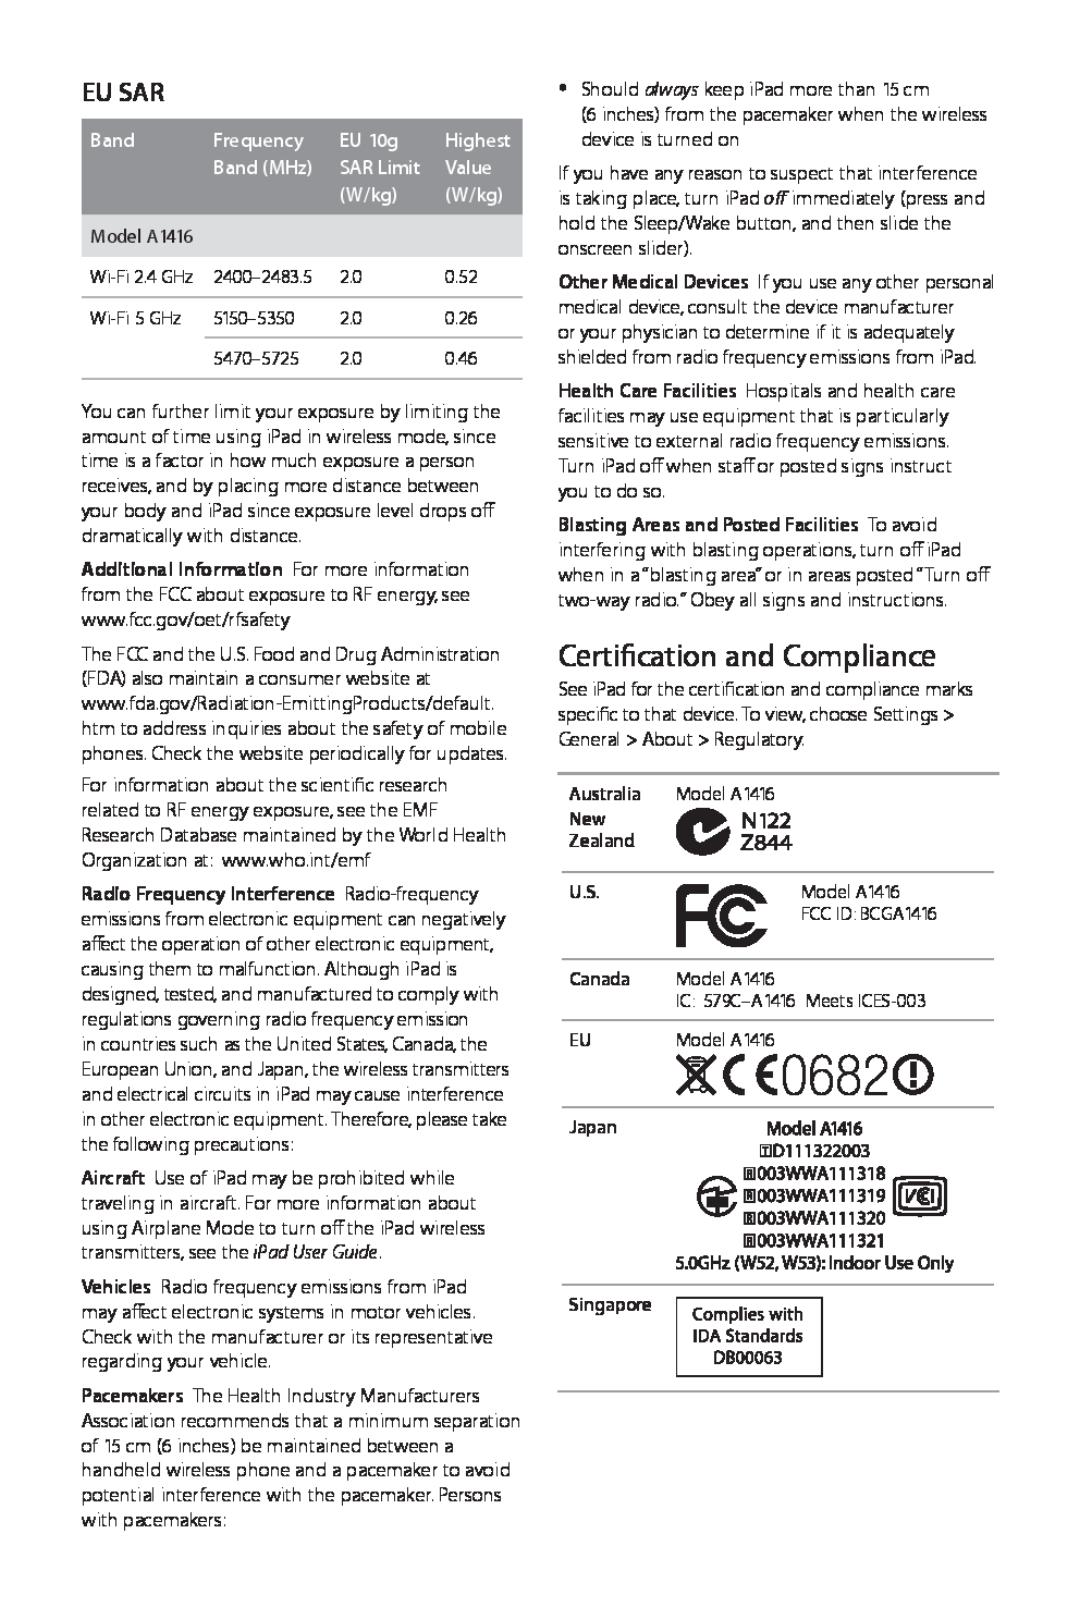 Apple A1416 manual Certification and Compliance, Eu Sar, EU 10g, Highest, Value, Frequency, Band MHz, W/kg 